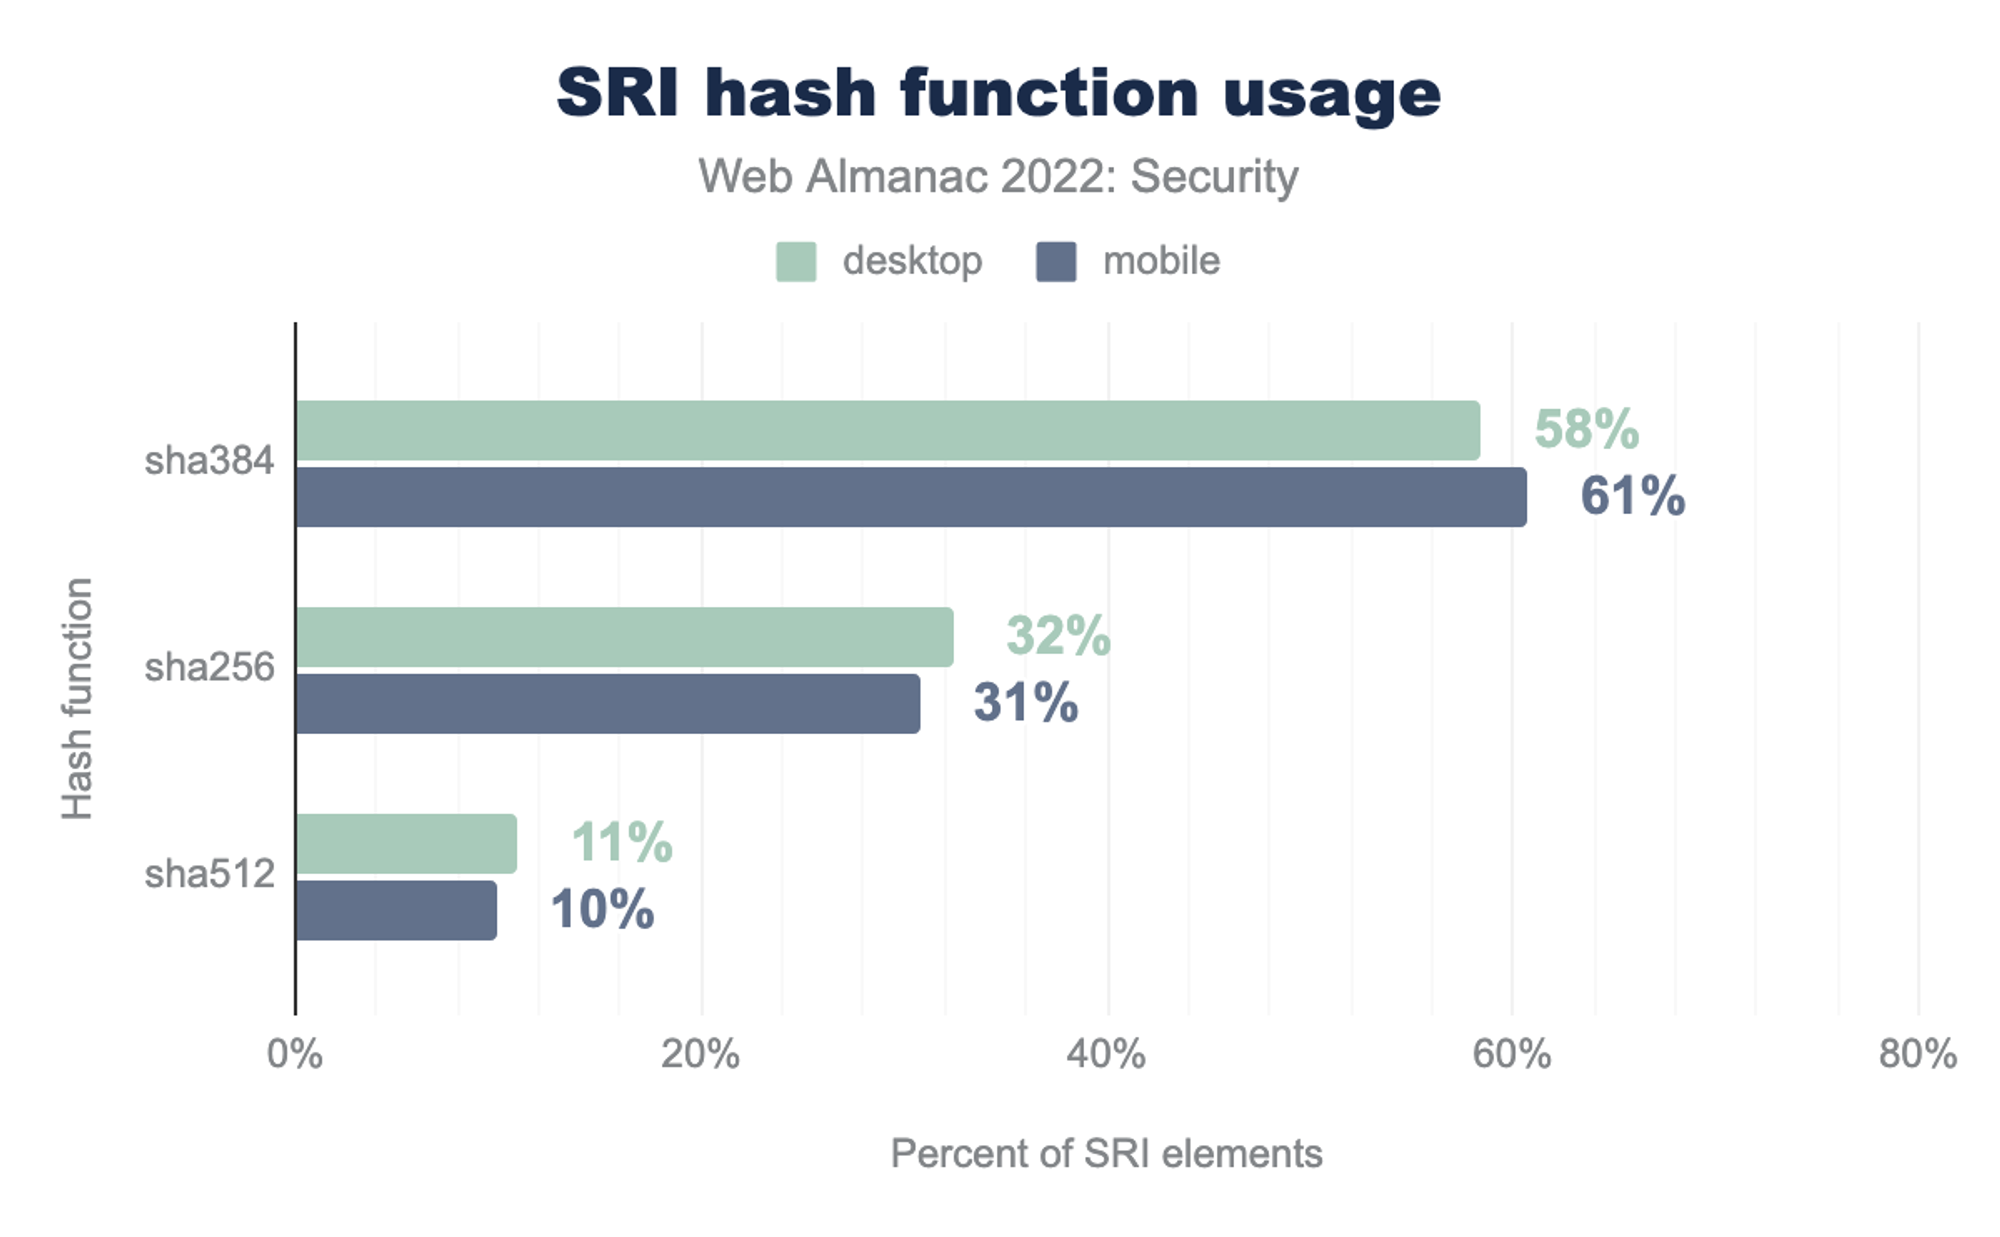 Bar chart showing percent of HTML elements with SRI using various hash functions. SHA-384 is used in 58.4% of elements with SRI in desktop
websites and 60.7% of elements with SRI in mobile websites. SHA-256 is used in 32.4% of elements with SRI in desktop websites and
30.8% of elements with SRI in mobile websites. SHA-512 is used in 10.9% of elements with SRI in desktop websites and 9.9% of
elements with SRI in mobile websites.